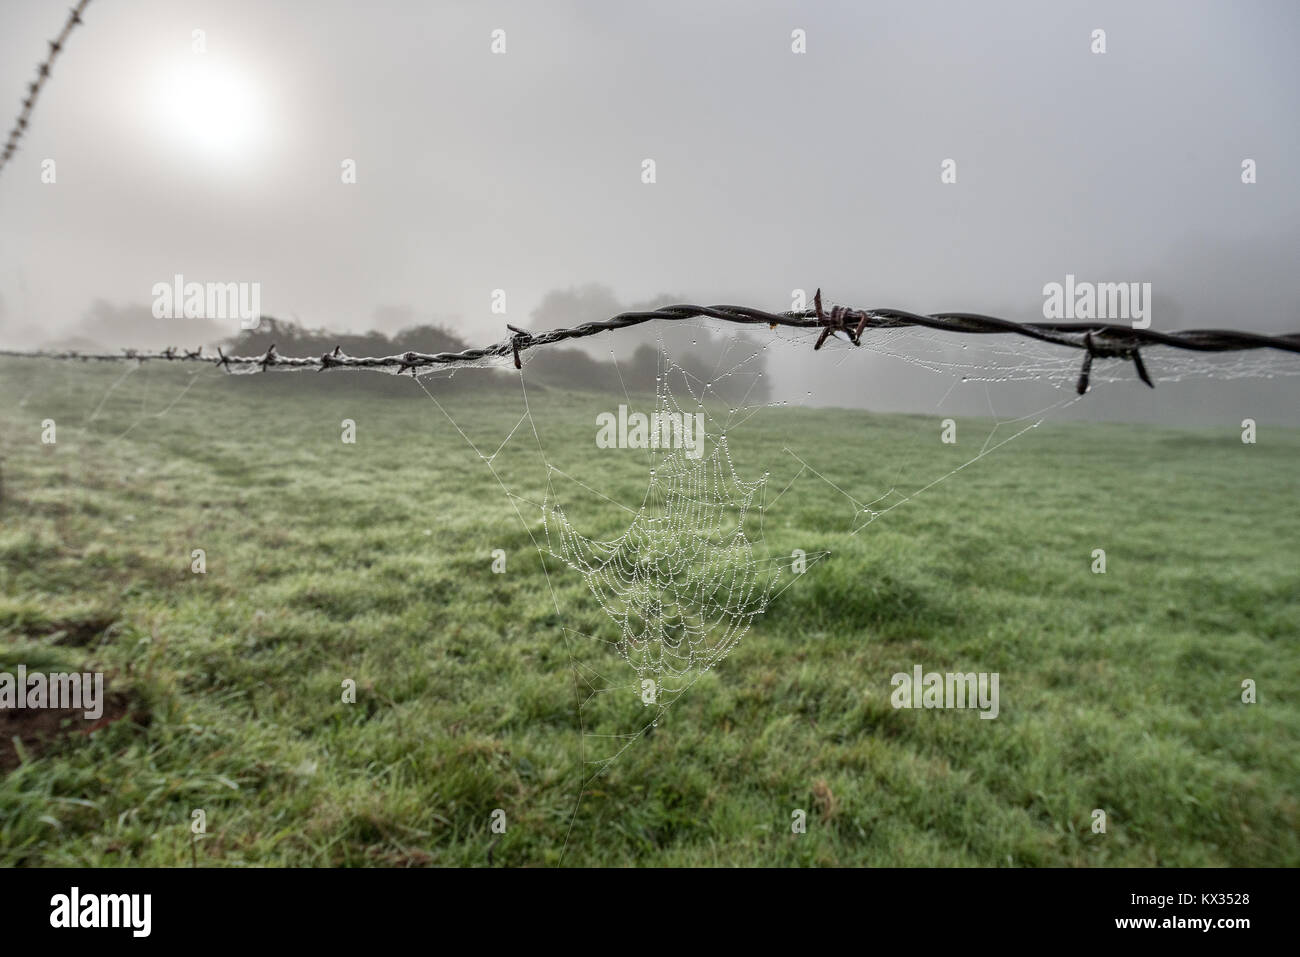 A fence made of barbed wire, a cobweb covered in dew and the sun trying to pierce the fog that covers the countryside Stock Photo